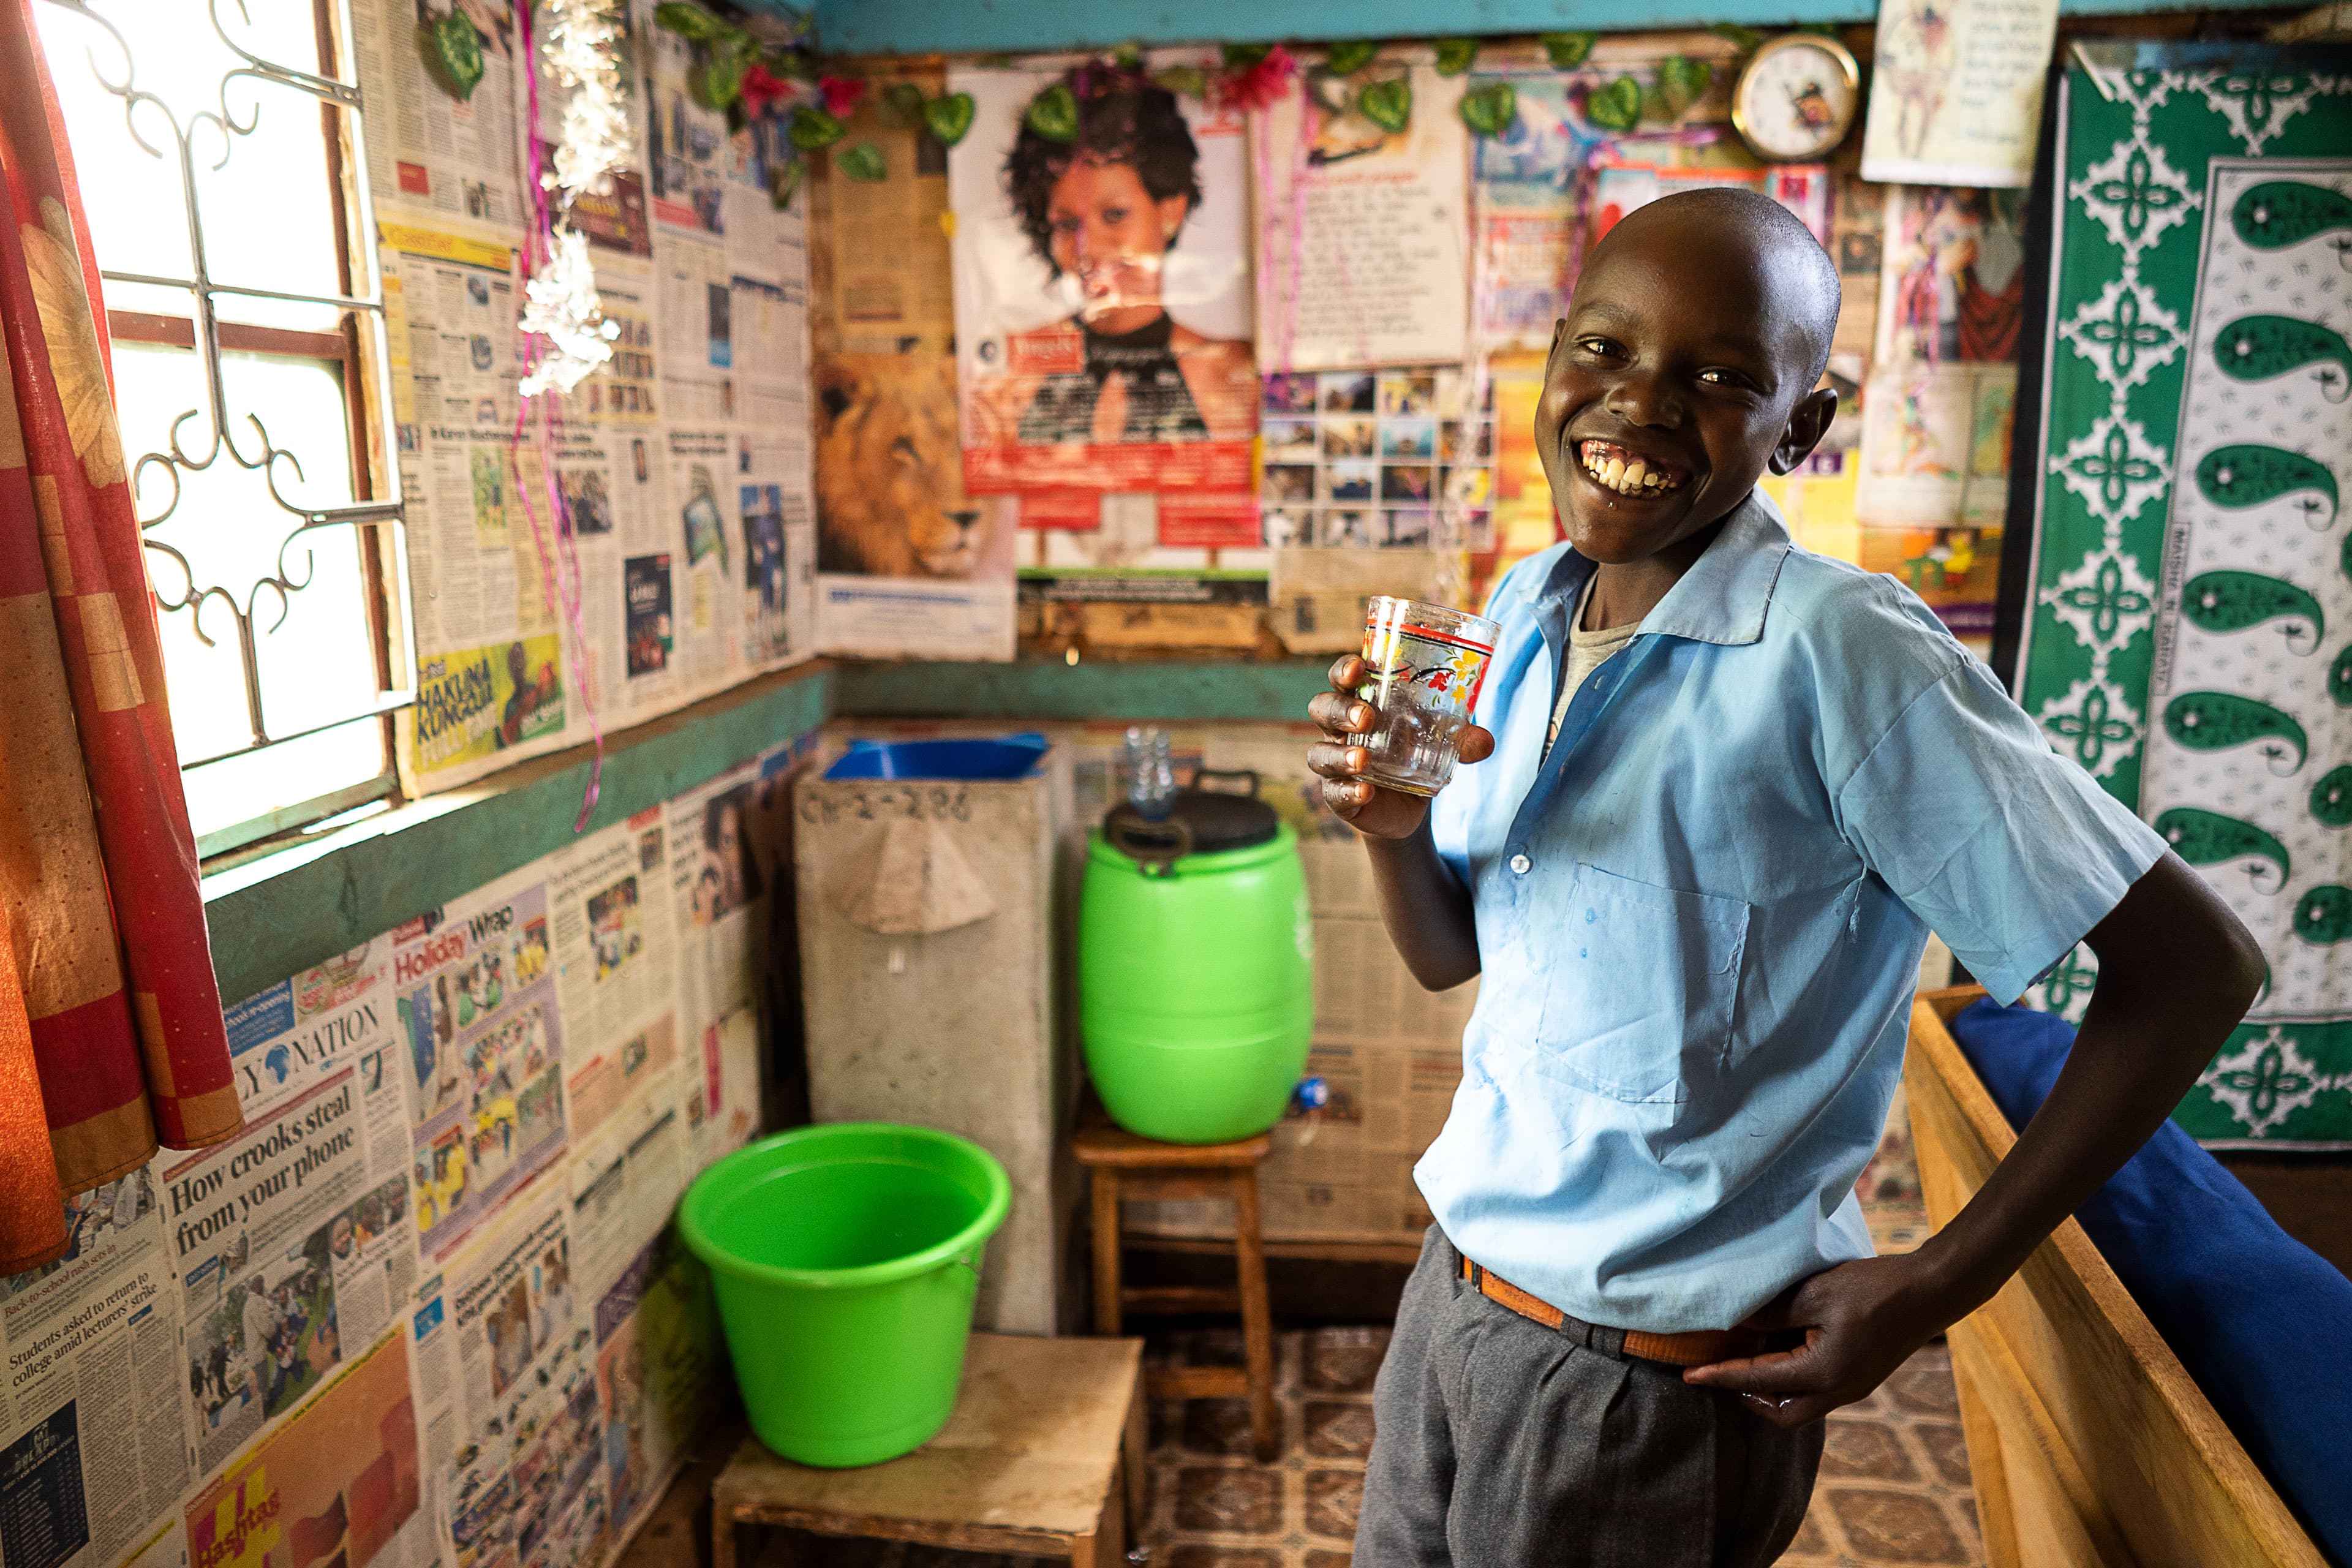 Philip’s son enjoys drinking clean water from a household filter provided by Samaritan’s Purse.